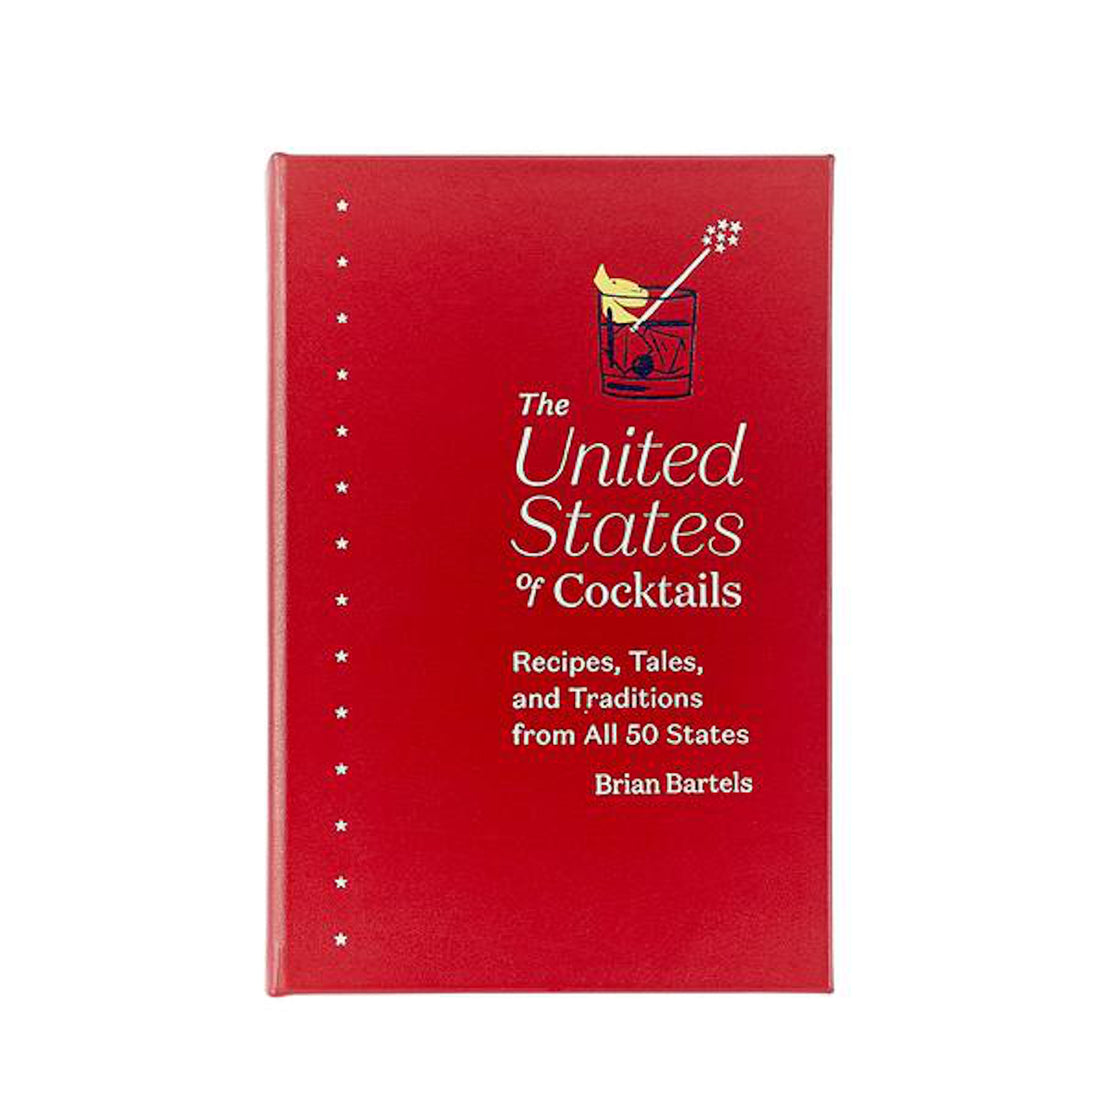 A red book titled &quot;The United States of Cocktails Leather Edition&quot; by Brian Bartels, featuring cocktail recipes and tales from all 50 states, exploring the cocktail culture and history from Graphic Image.